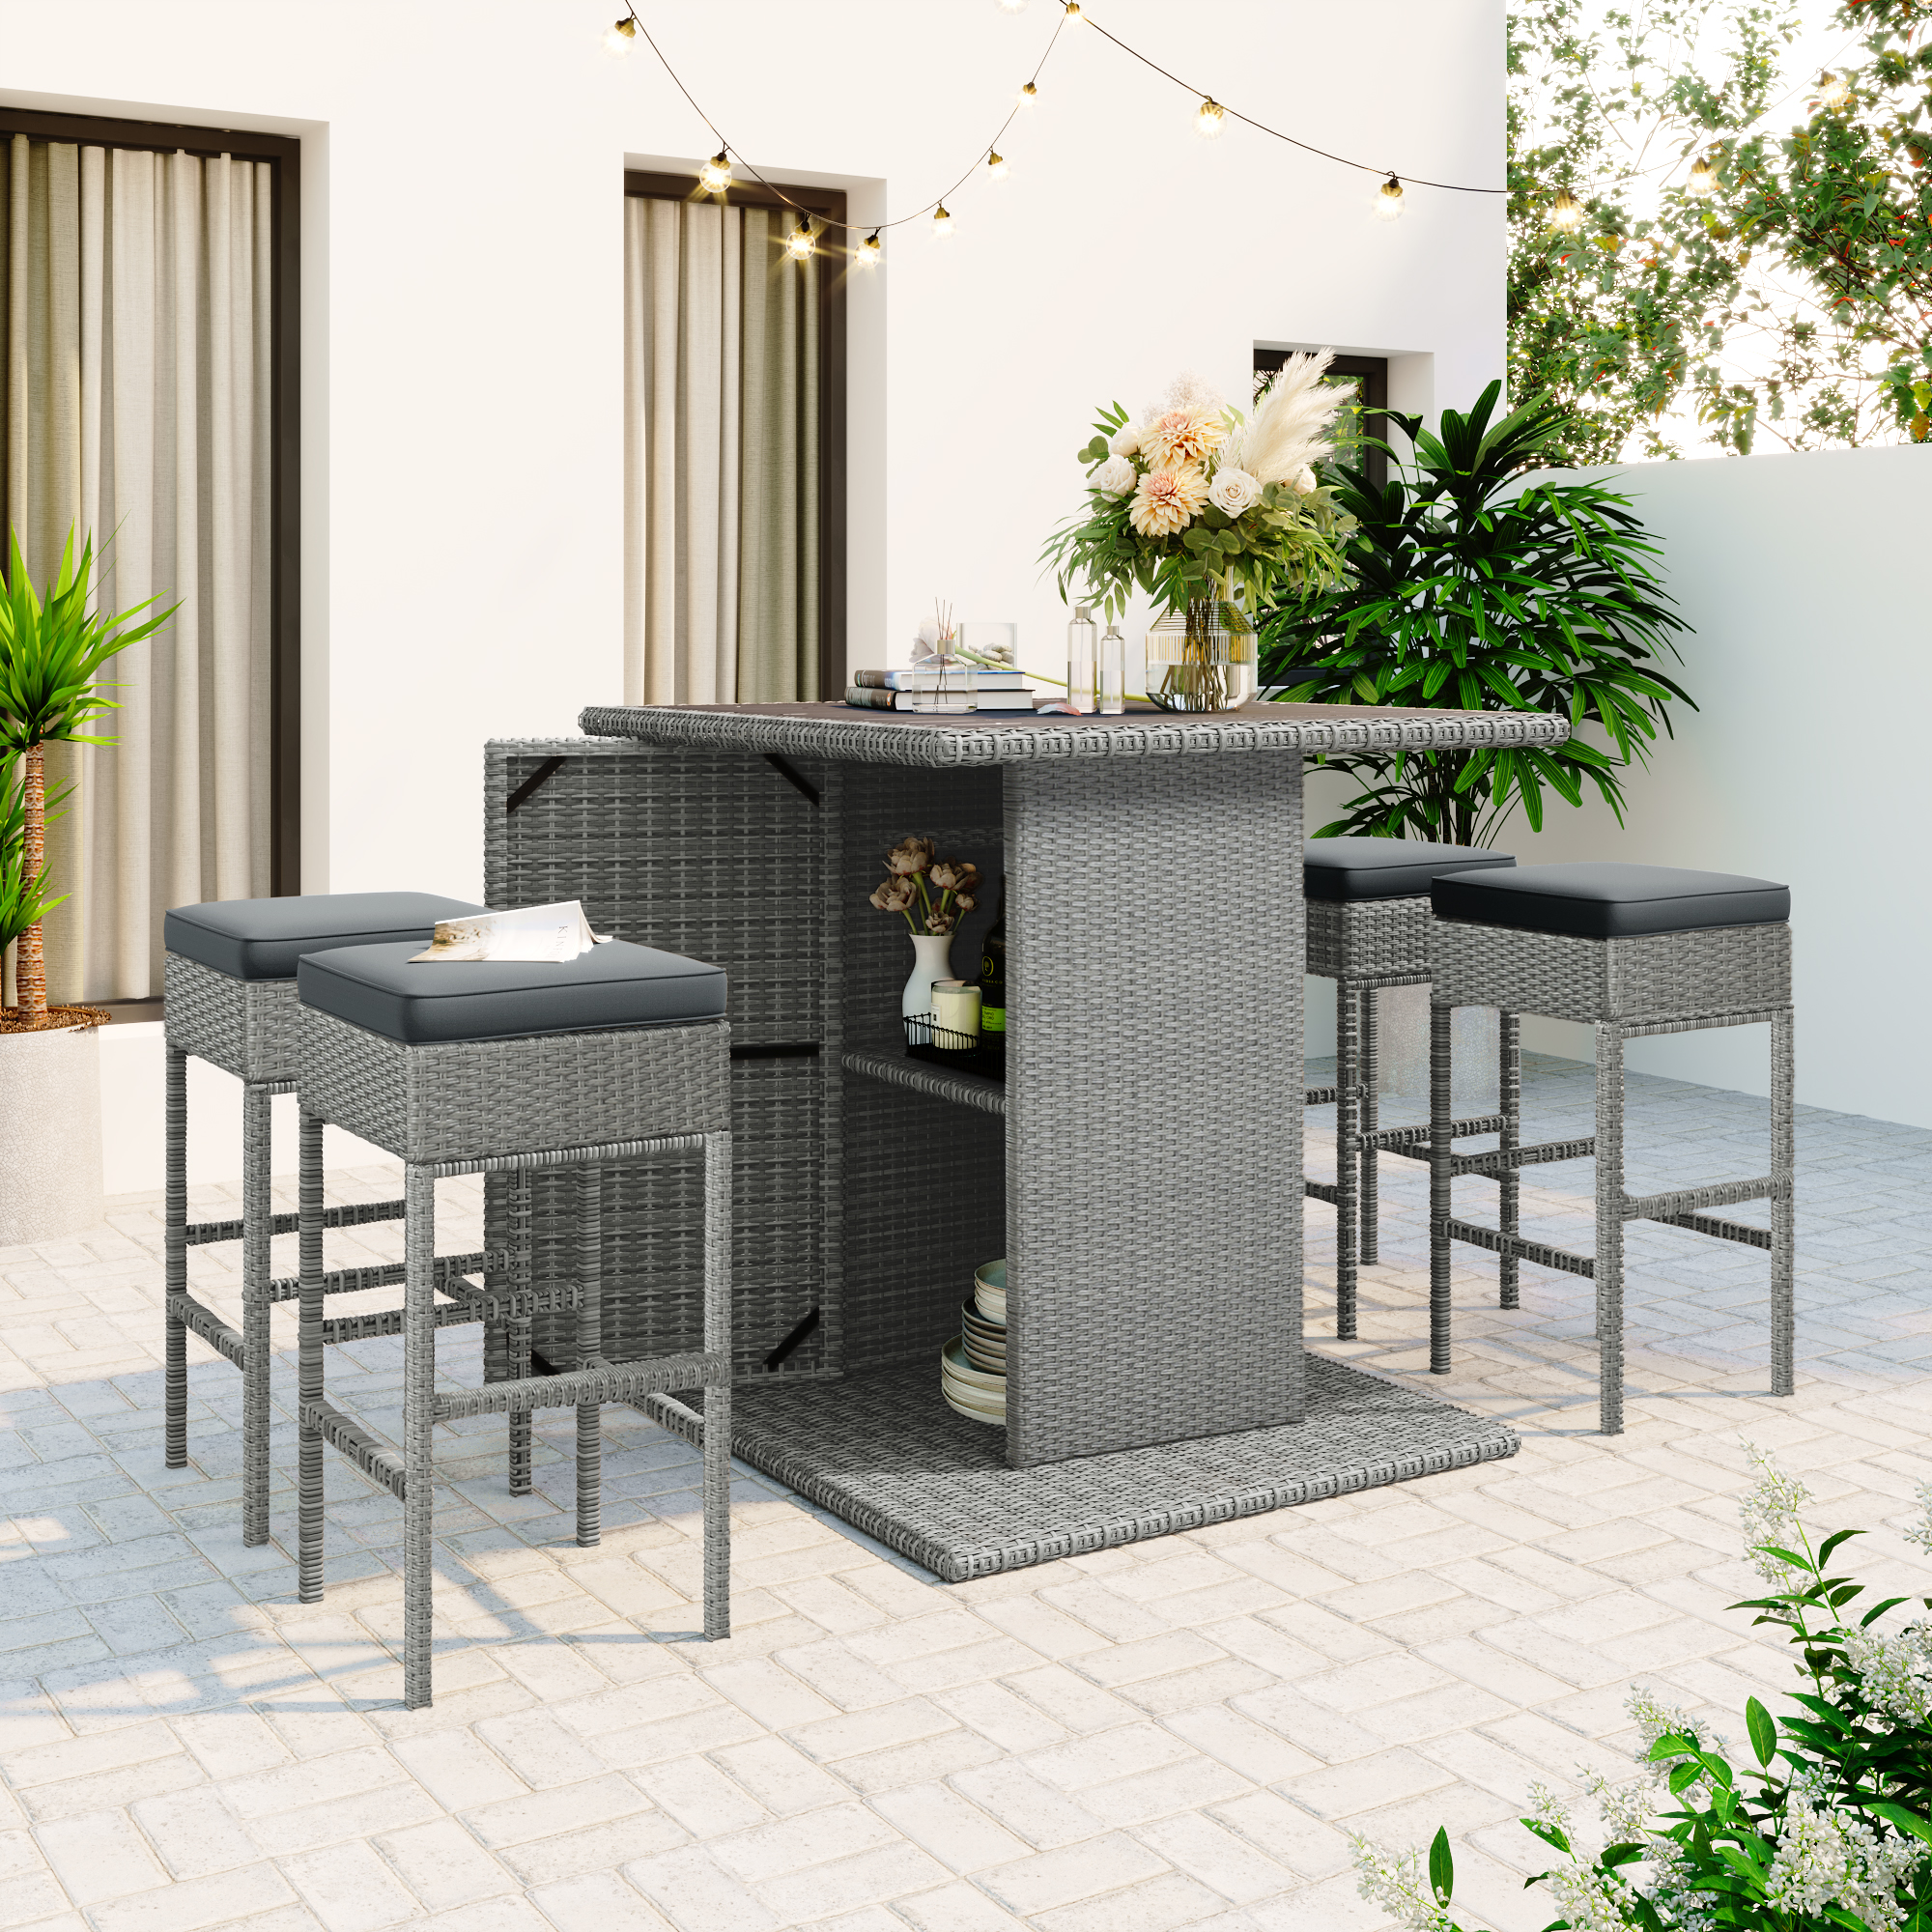 5 Piece Outdoor Patio Height Bar Dining Table Sets, 41'' Hight Outdoor Patio Funiture Table Set with 4 Chairs and Cushions, Kitchen Table with Storage Shelf for Backyard, Poolside, Grey Wicker, S5984 - image 1 of 10